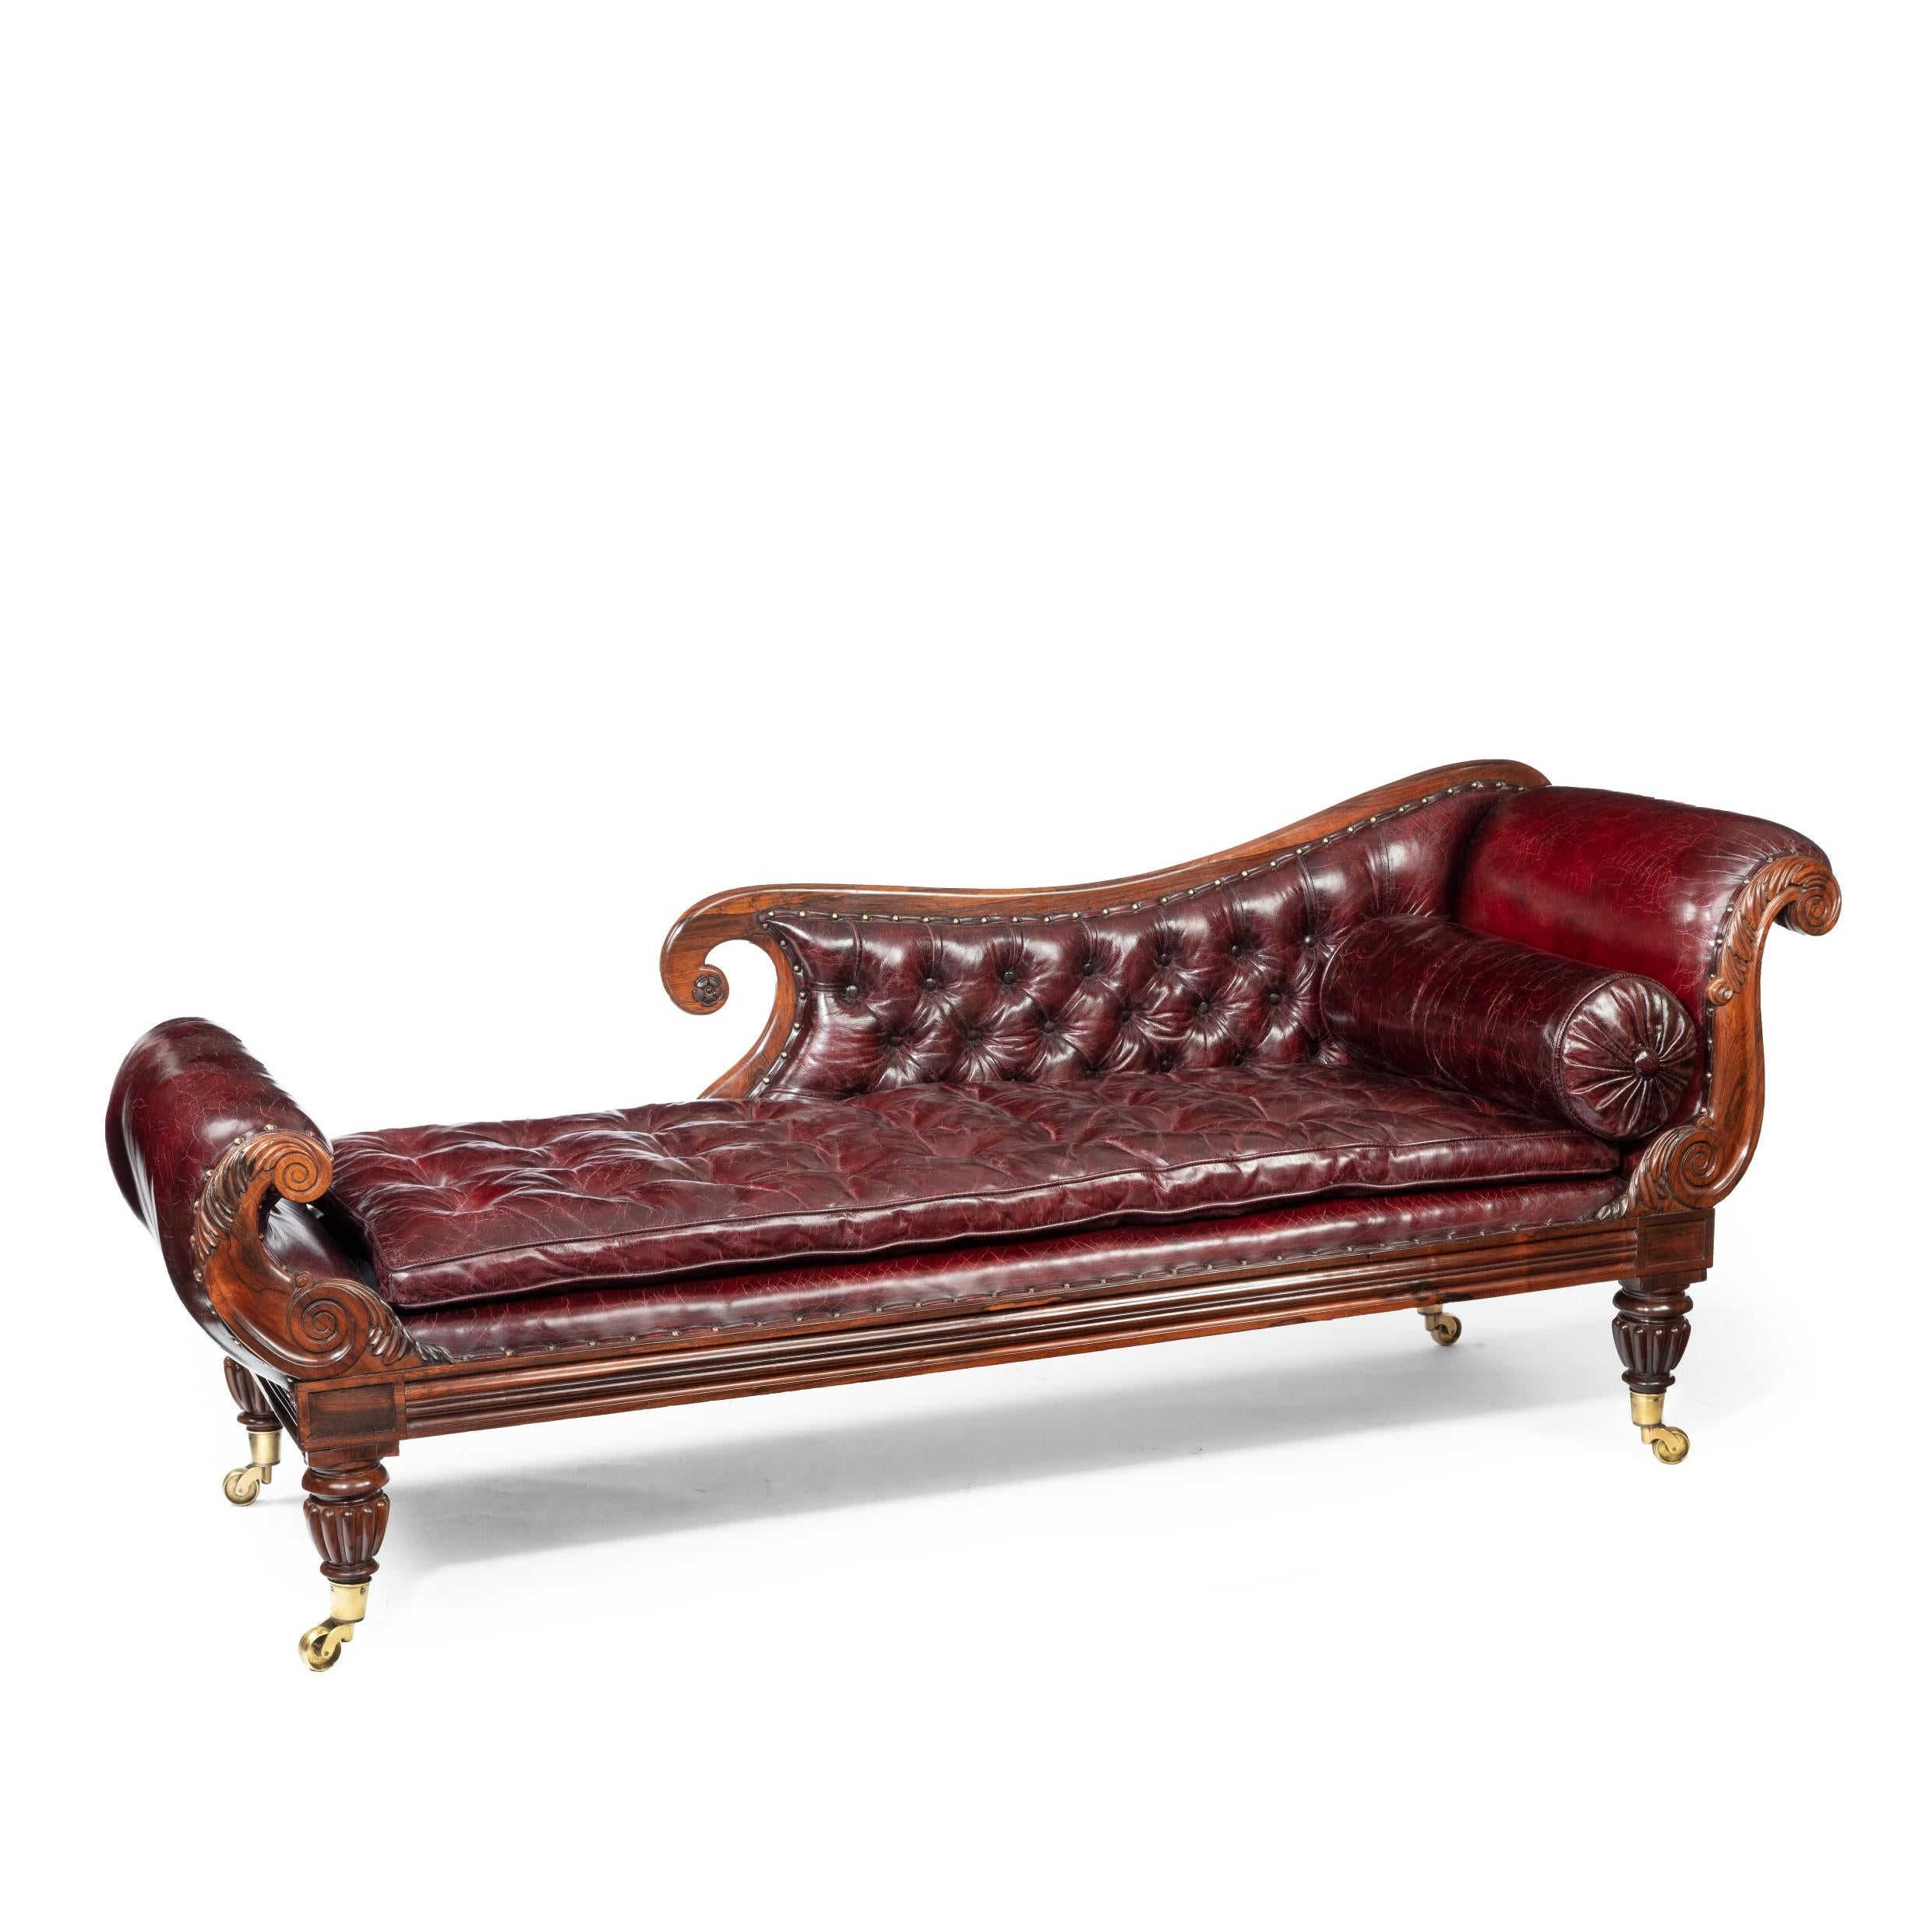 Early 19th Century Late Regency Rosewood Chaise Longue